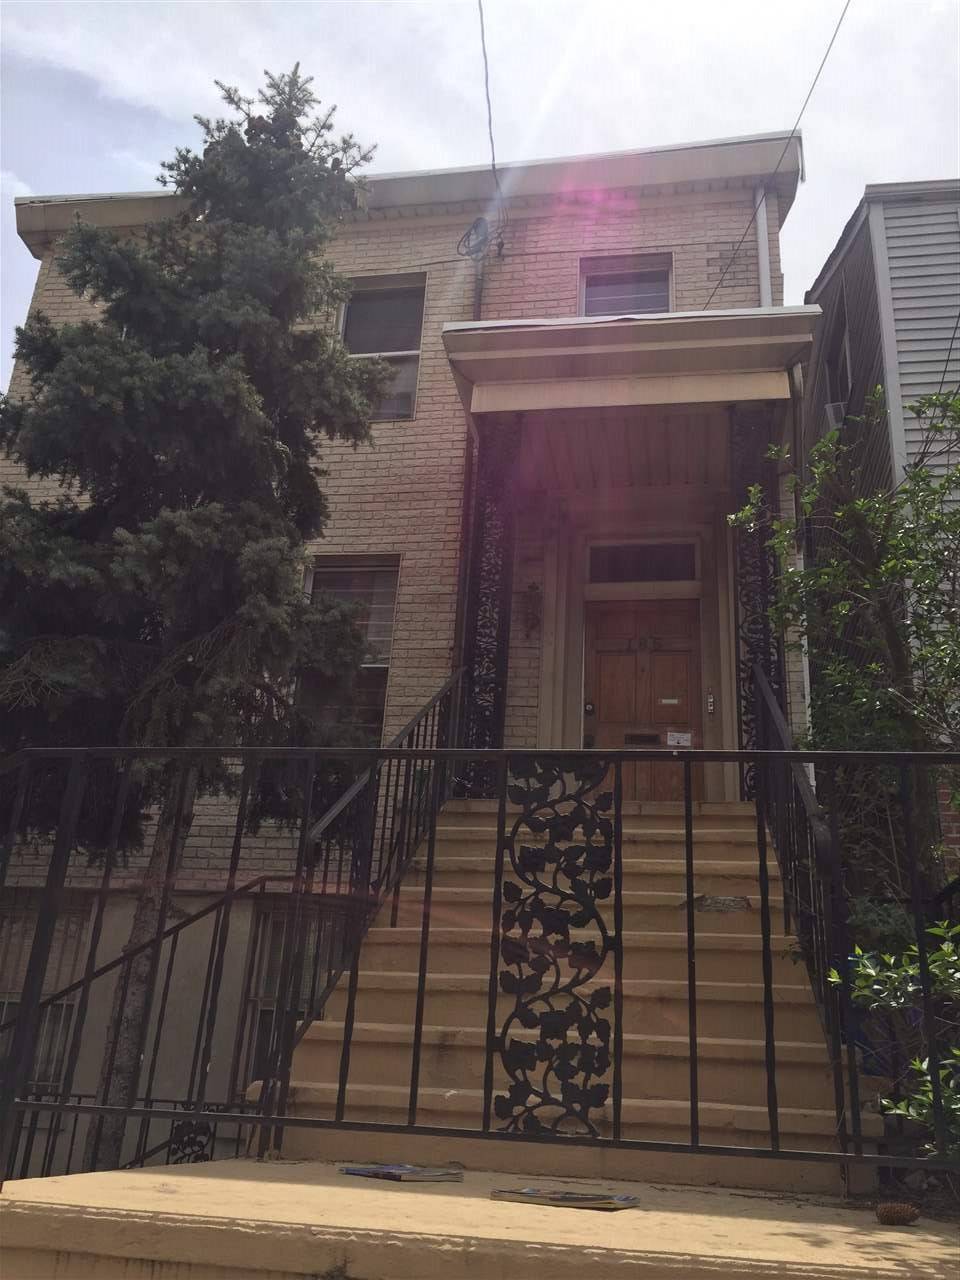 Duplex 3 bedroom/2 Bath available conveniently located near Journal Square Path